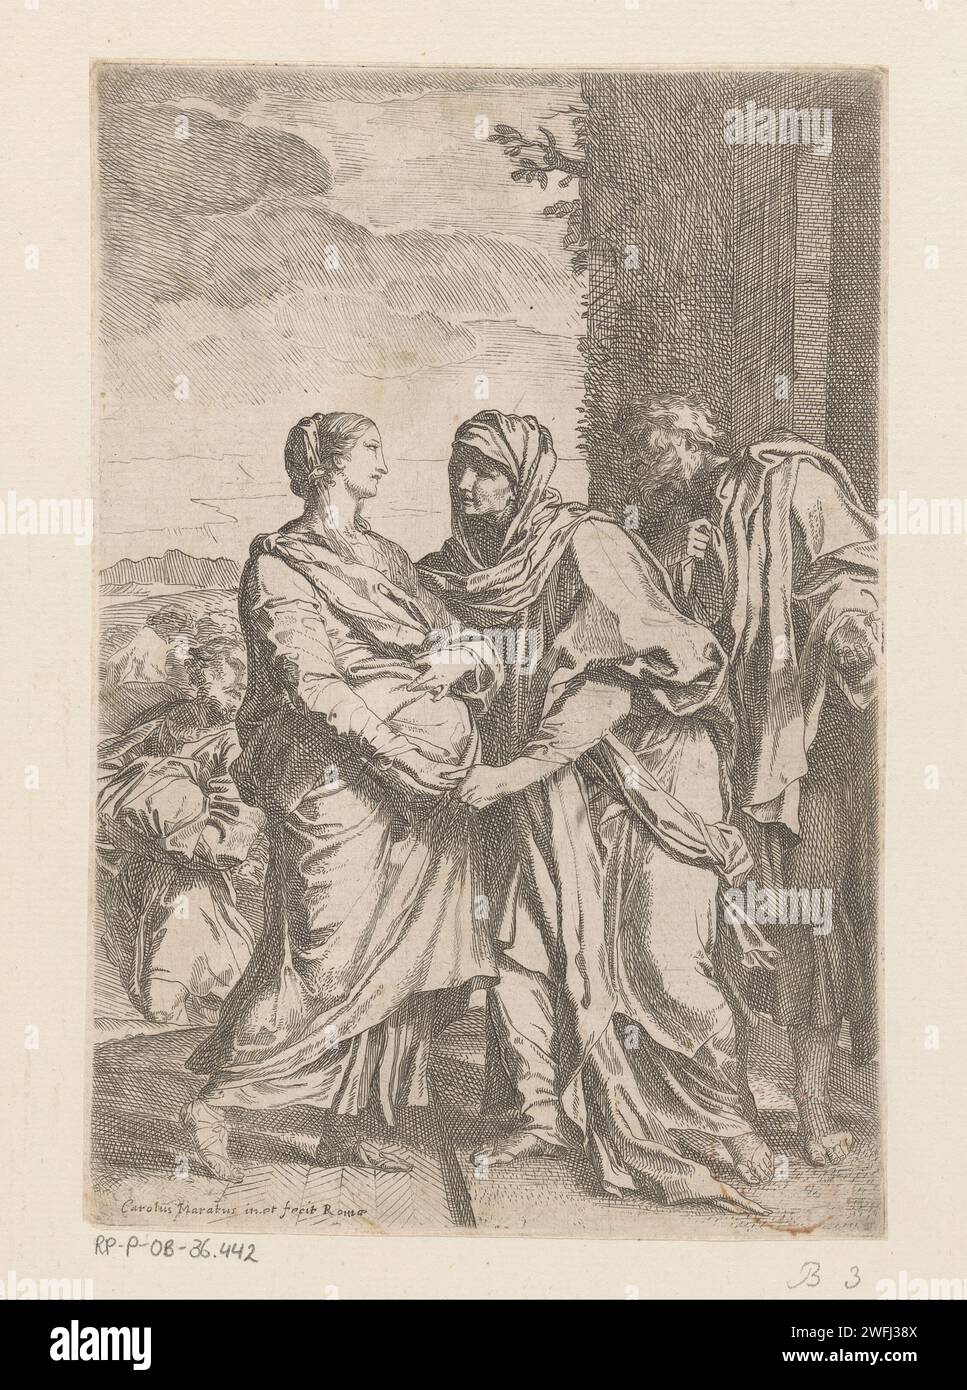 Visitation, Carlo Maratta, 1635 - 1713 print The pregnant Mary visits her niece Elisabet. Zacharias and Joseph are in the background. Rome paper etching Visitation (possibly Joseph and/or Zacharias present) (Luke 1:39-56) Stock Photo